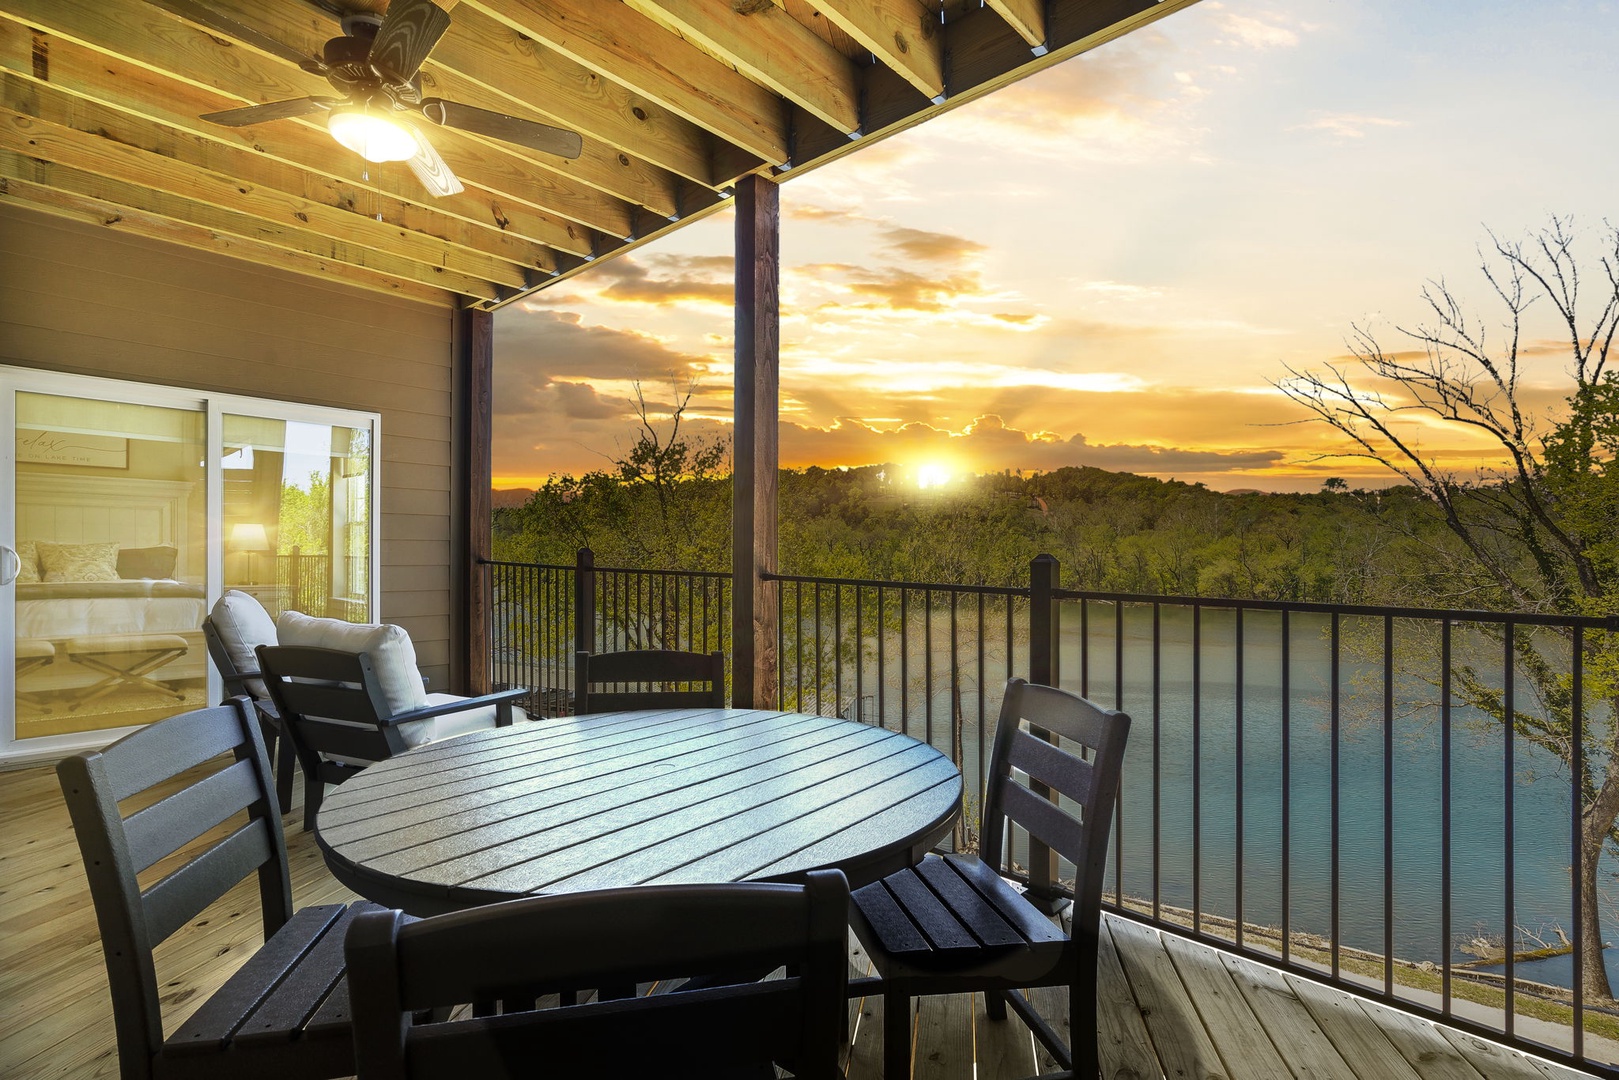 Enjoy the sunset in your very own Lakeview Oasis